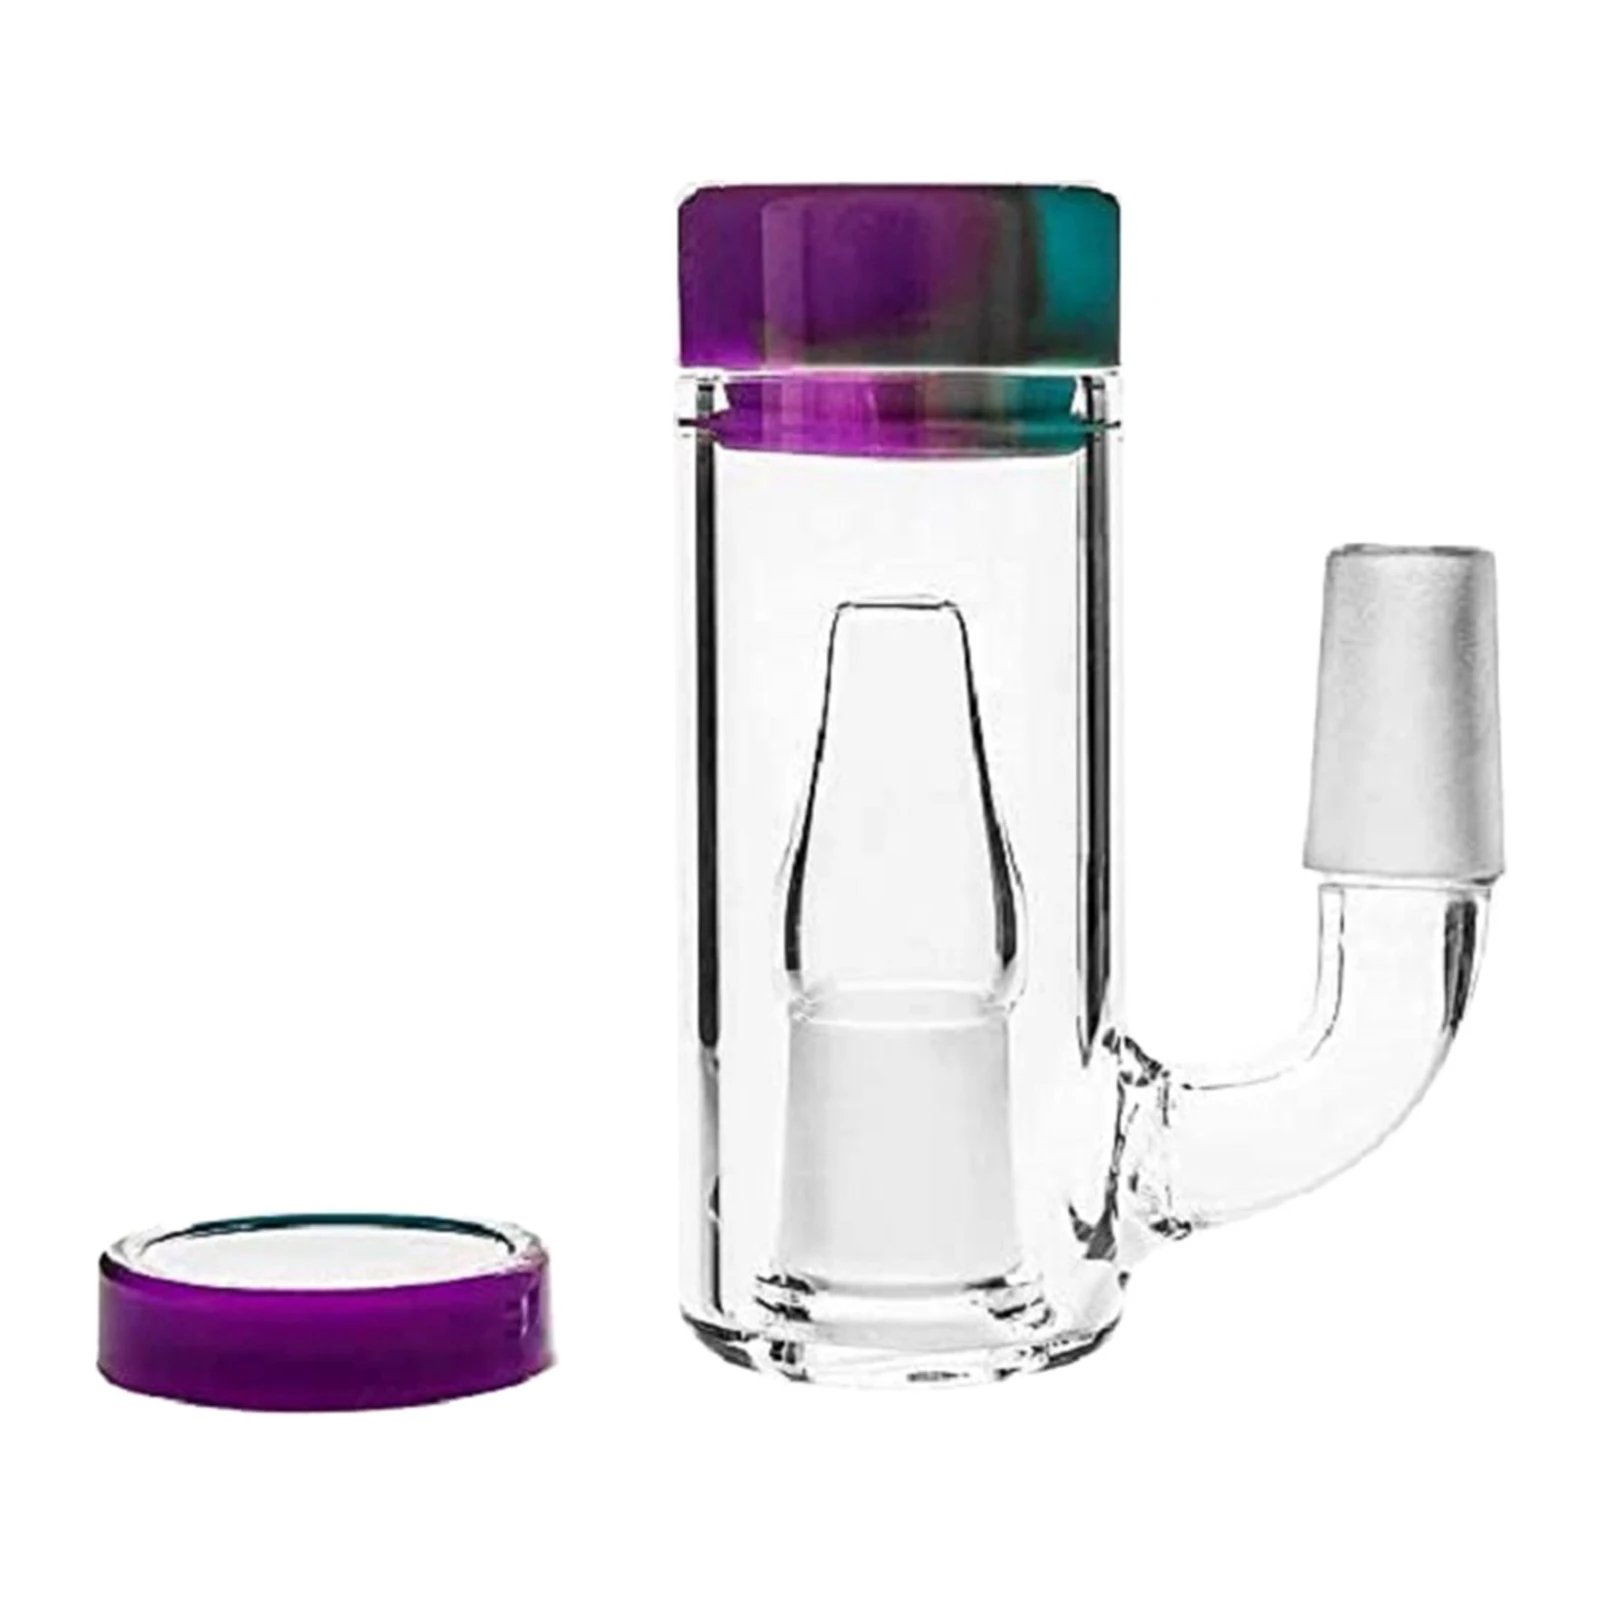 Glass Collector Silicone Container Kit with 14mm Male Connector, Reusable and Convenient